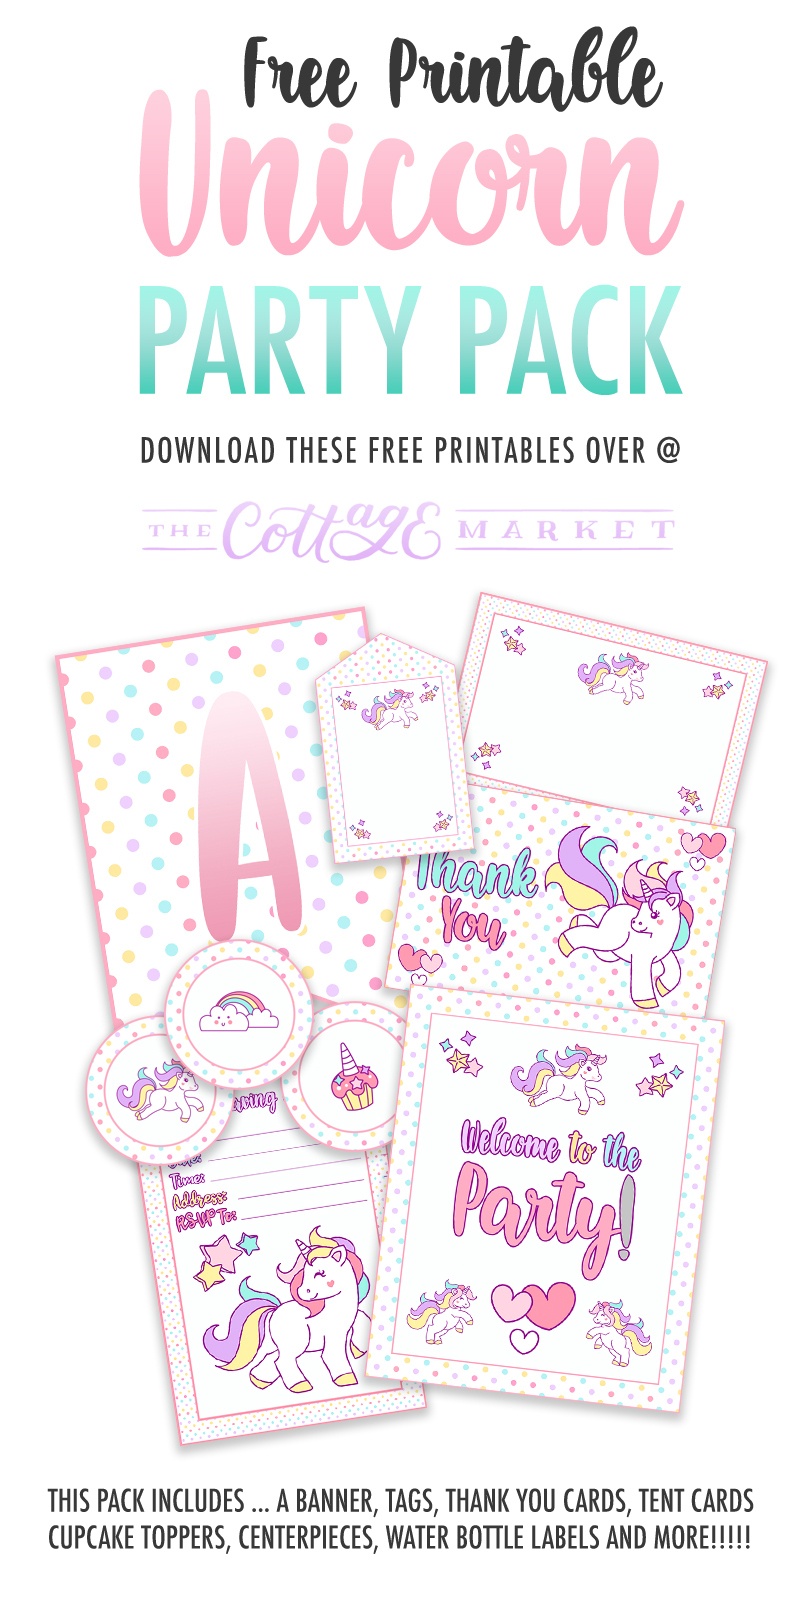 Free Printable Unicorn Party Decorations Pack - The Cottage Market - Free Printable Unicorn Birthday Invitations